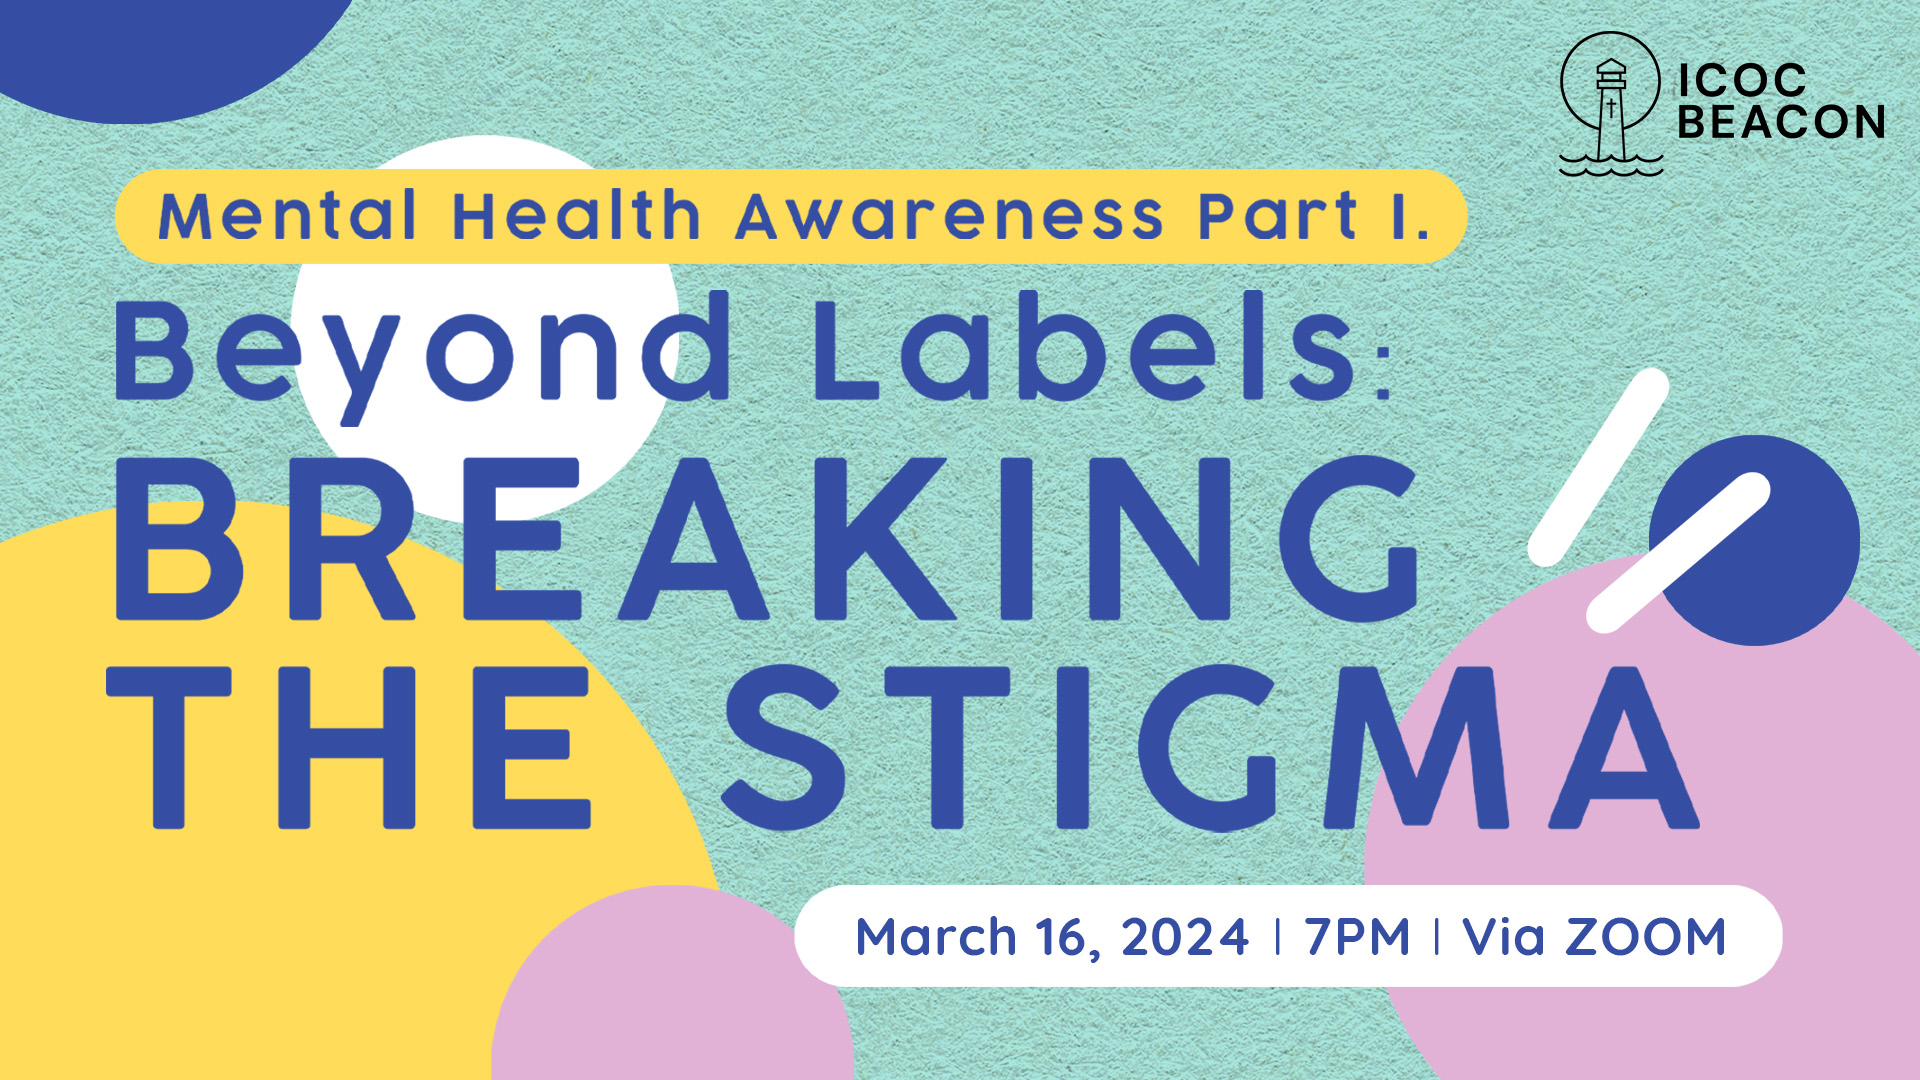 Beyond Labels: Breaking the Stigma; A Mental Health Awareness Event by ICOC Beacon